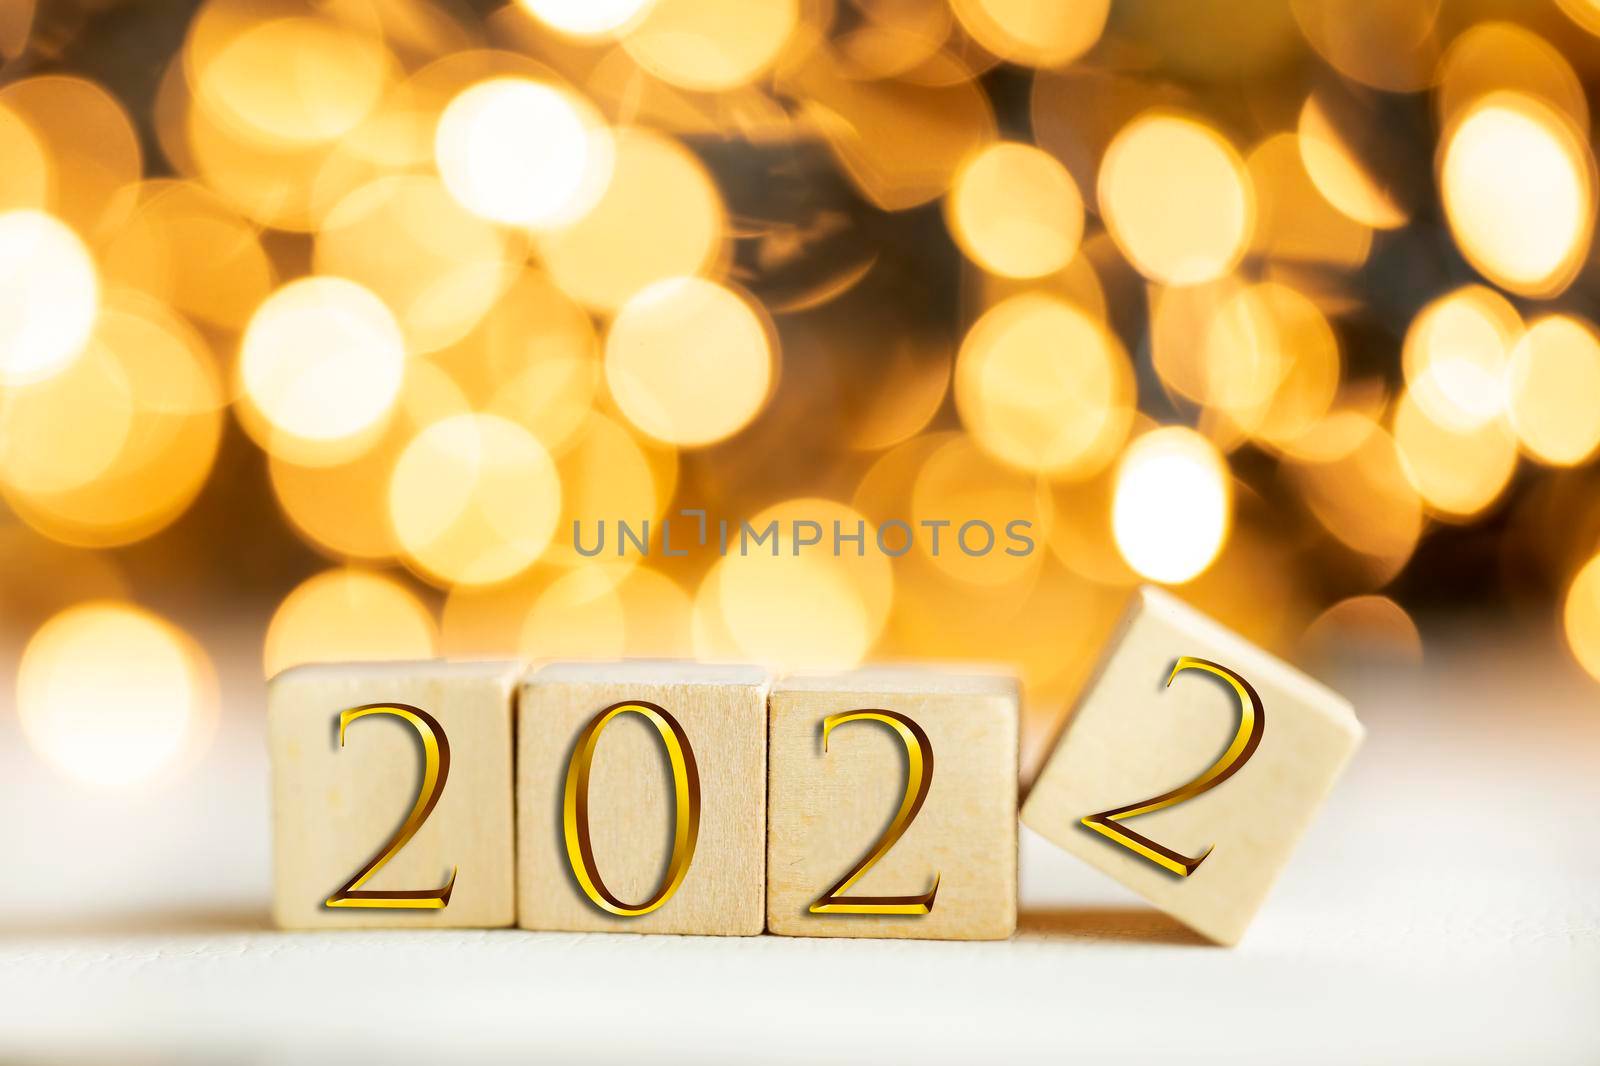 The year 2022 written on wooden cubes in gold luxury letters with shiny bokeh background, New Year celebration concept glitter by Annebel146